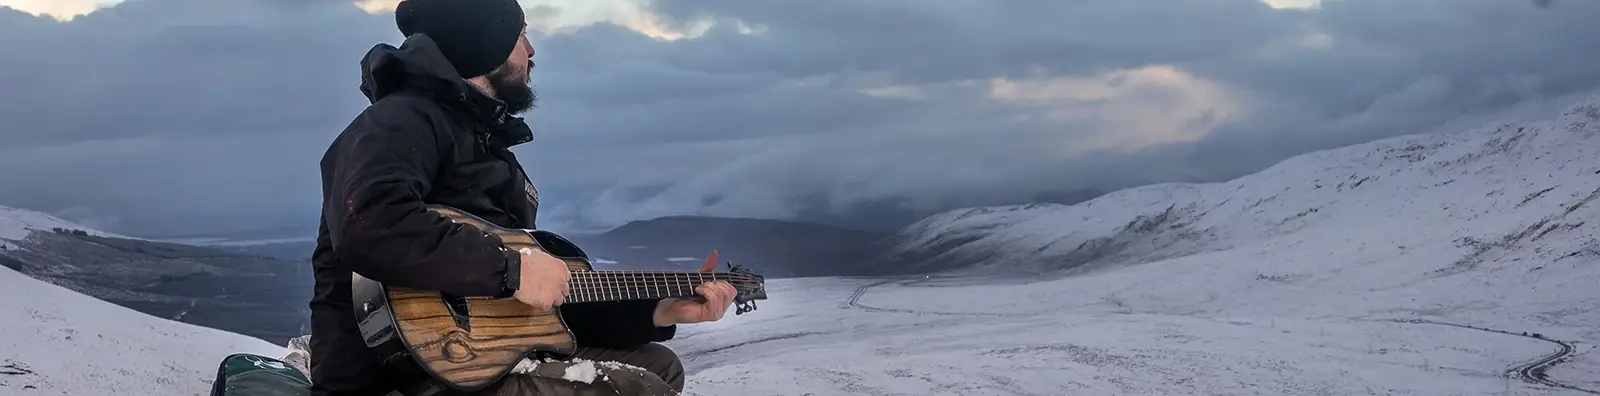 Man Playing Emerald Guitar on a snowy mountaintop